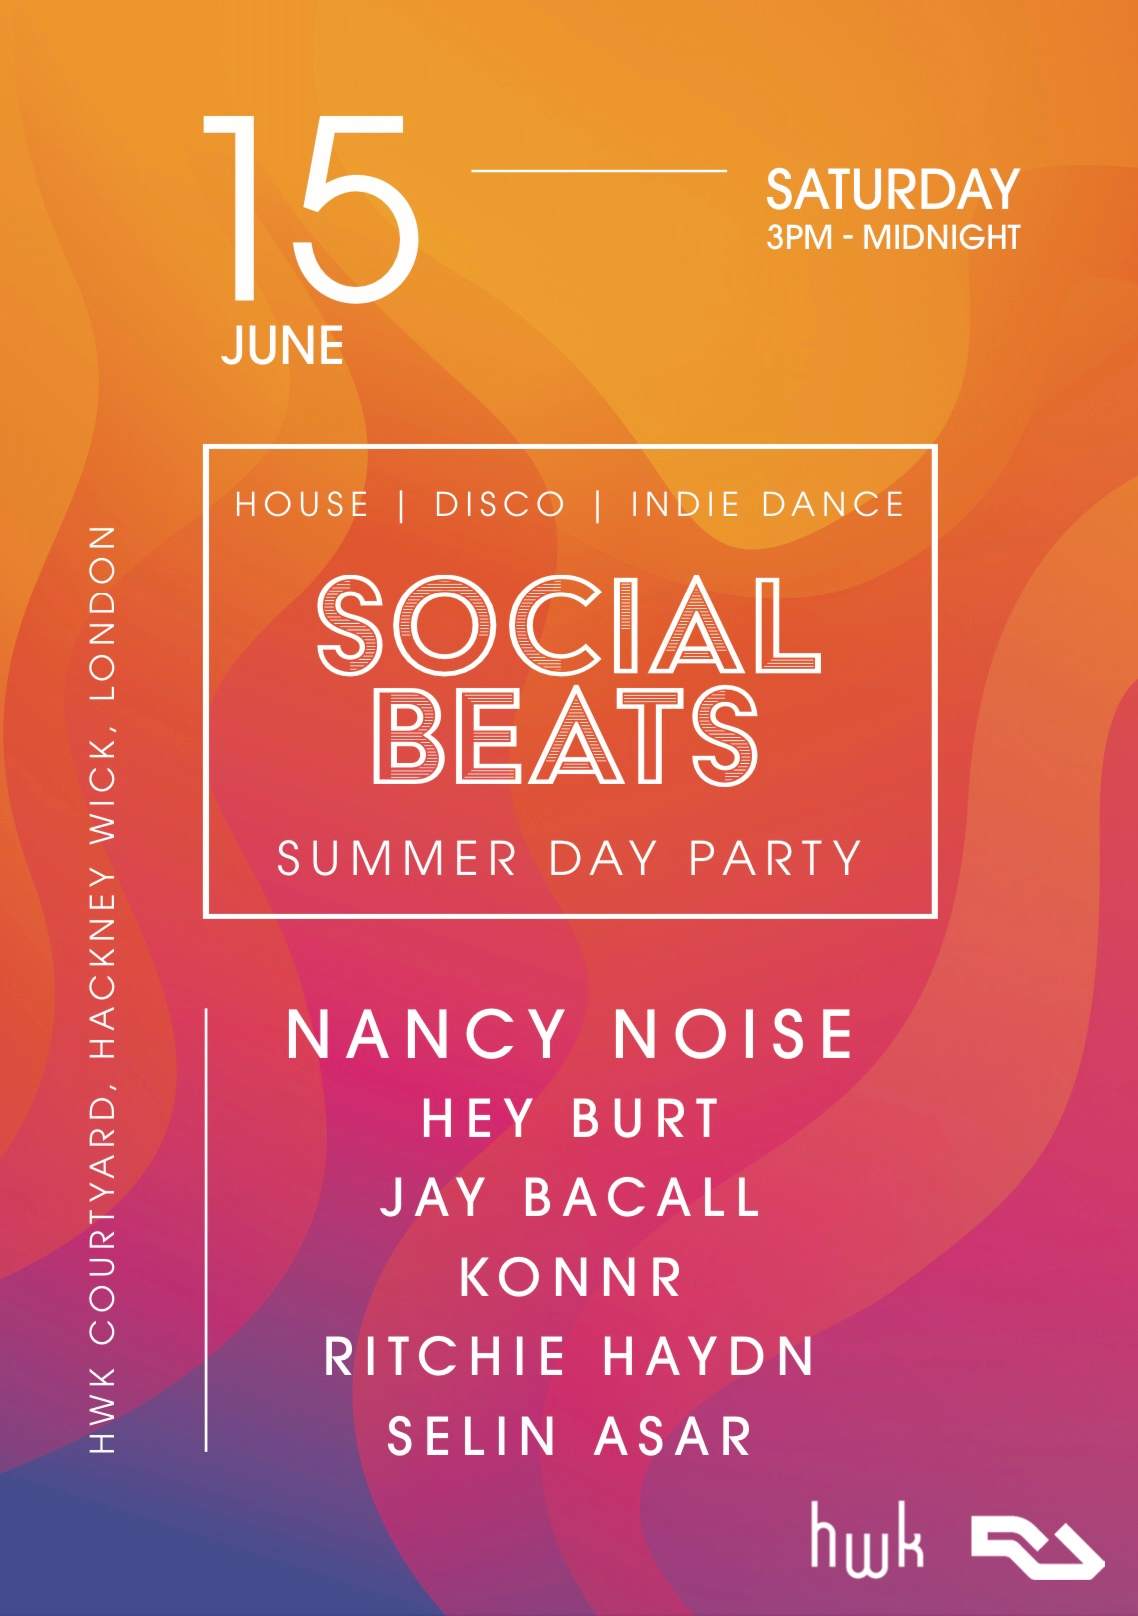 The Social Beats Summer Party w/ Special guest - Nancy Noise - フライヤー表